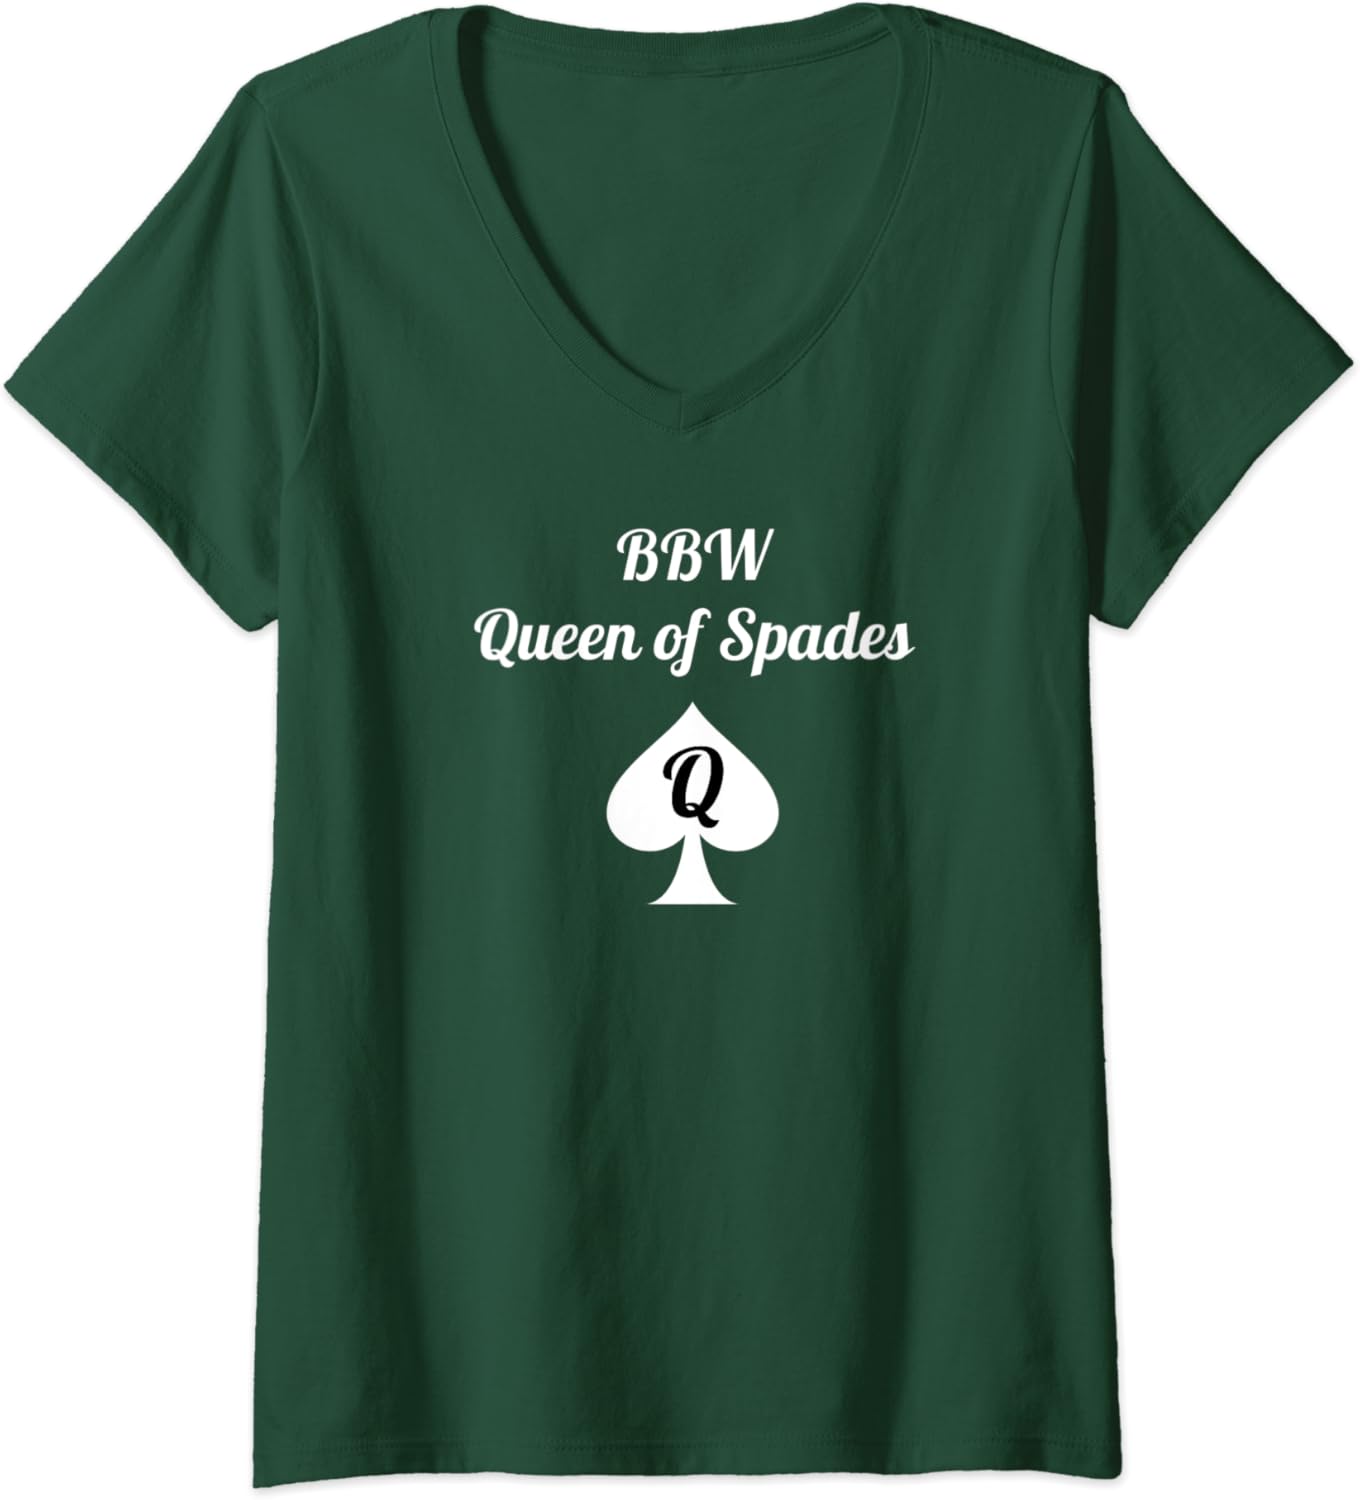 bj carey recommends bbw queen of spades pic